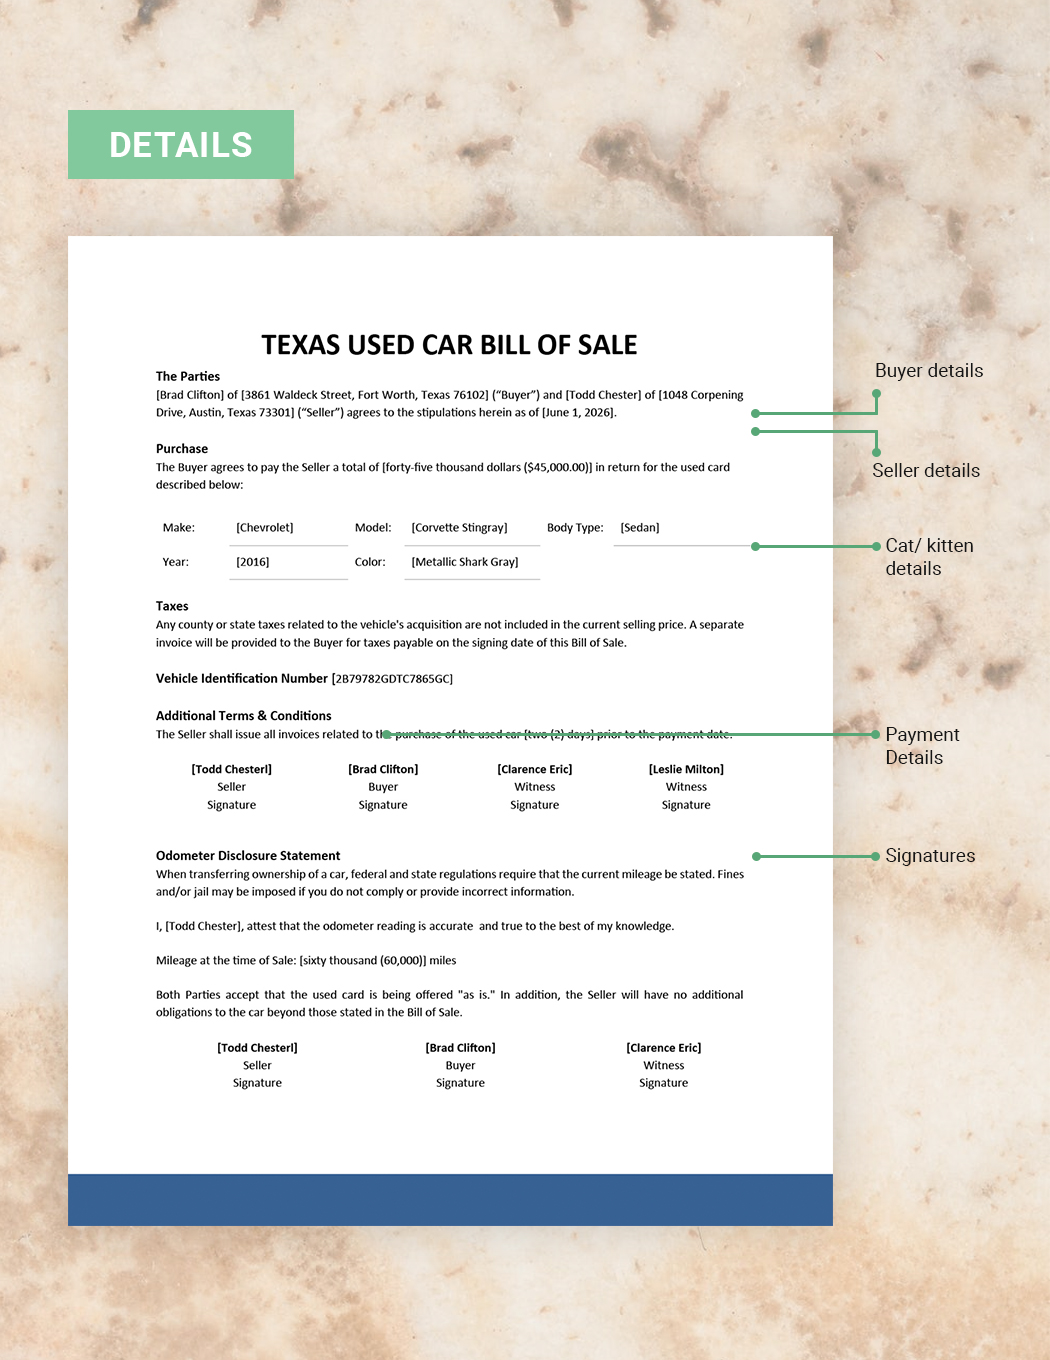 Texas Used Car Bill of Sale Template